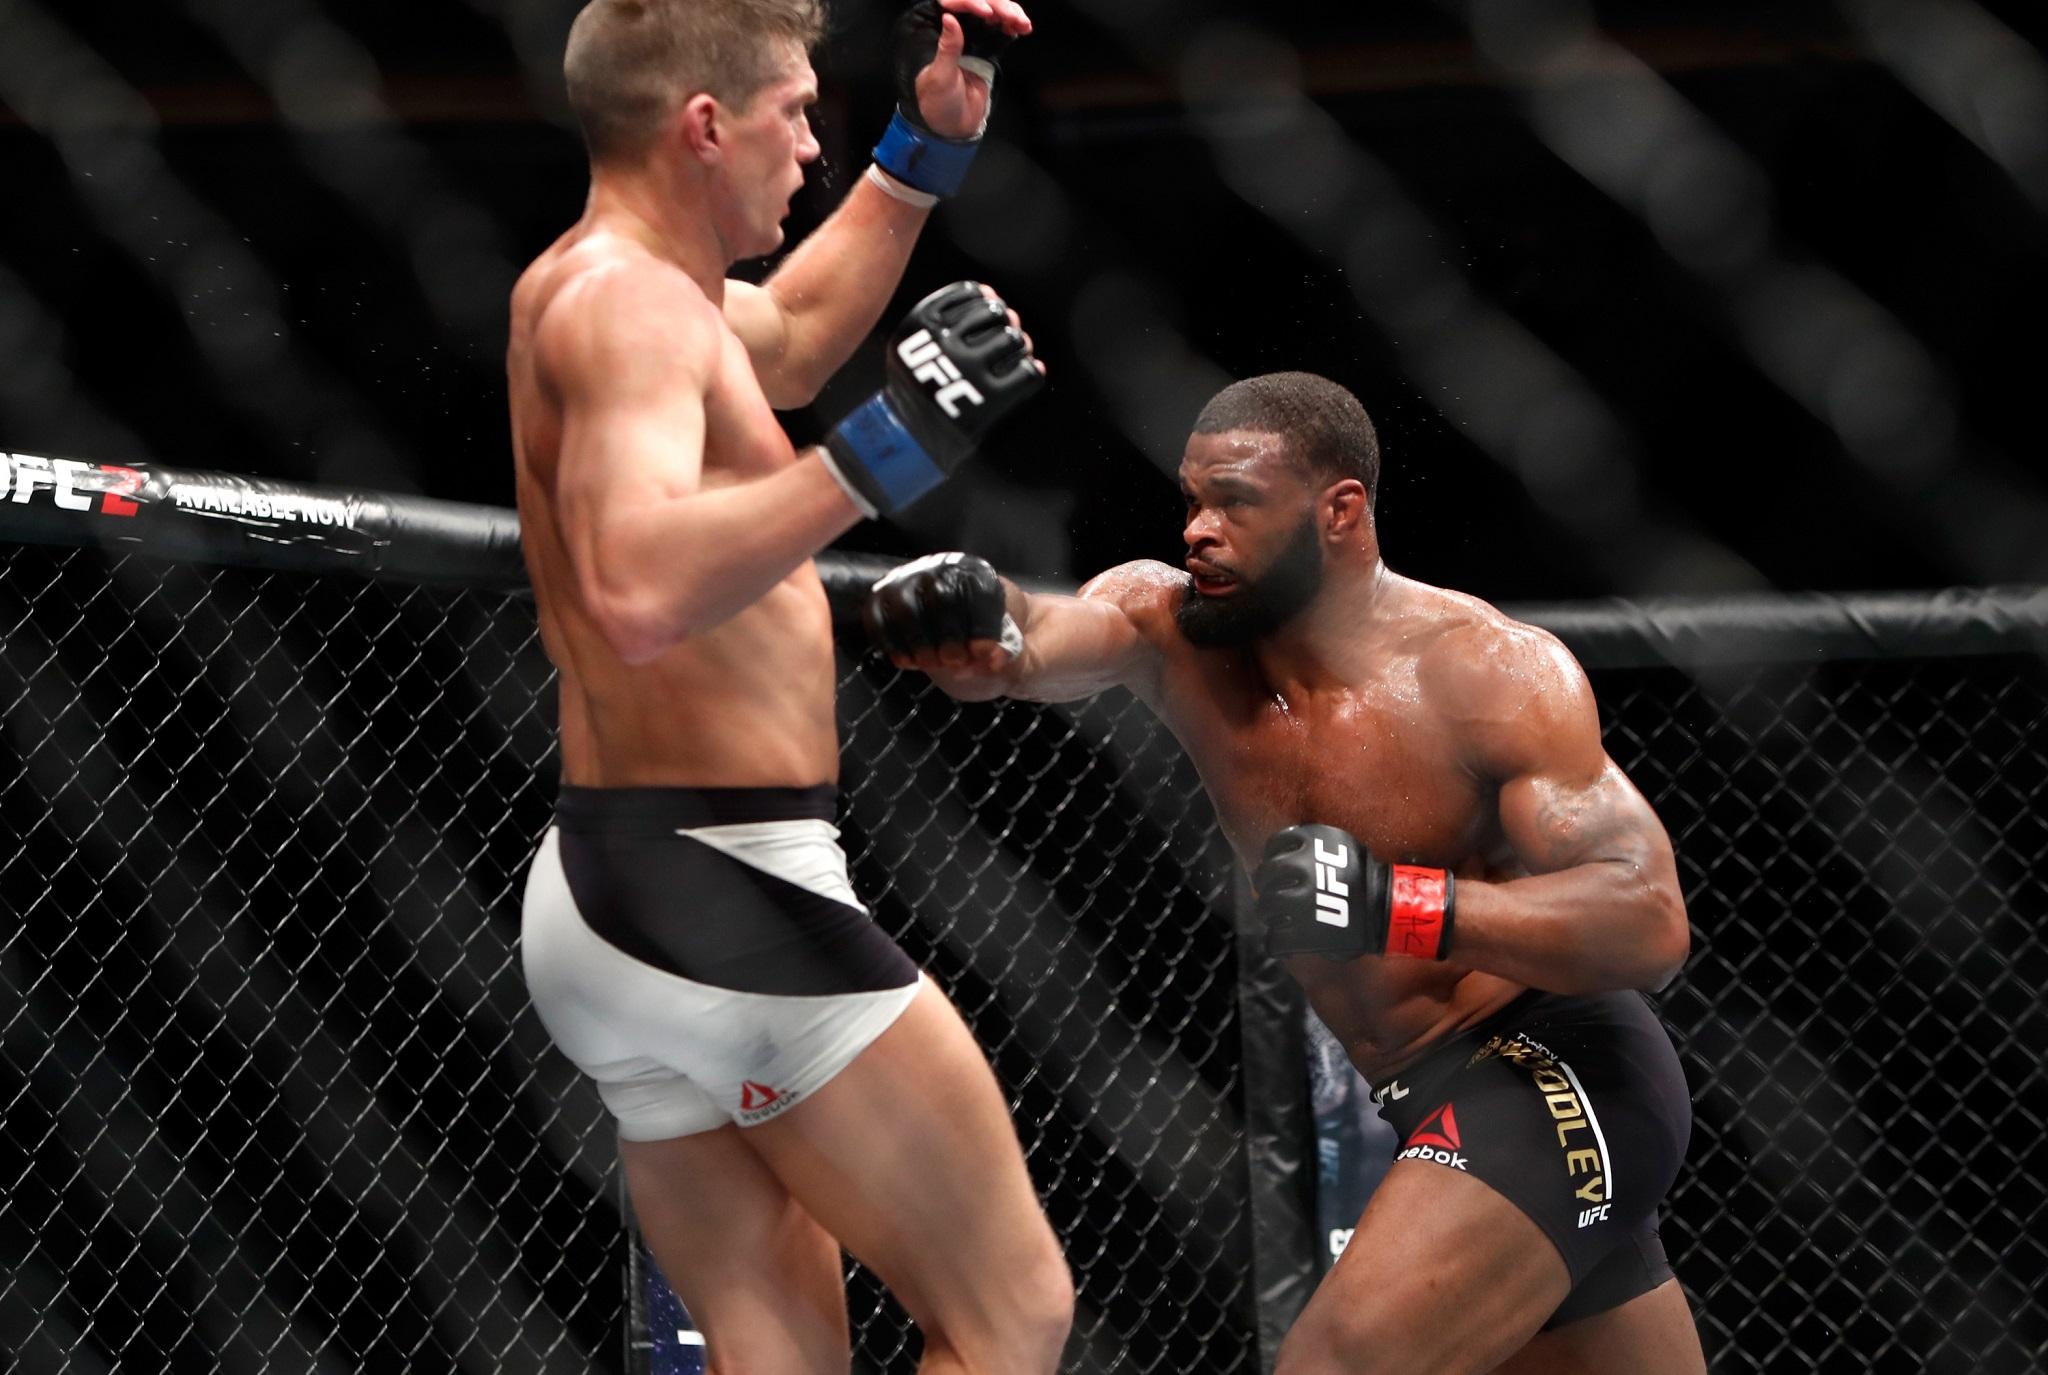 Tyron Woodley secured a majority decision victory over Stephen 'Wonderboy' Thompson at UFC 209